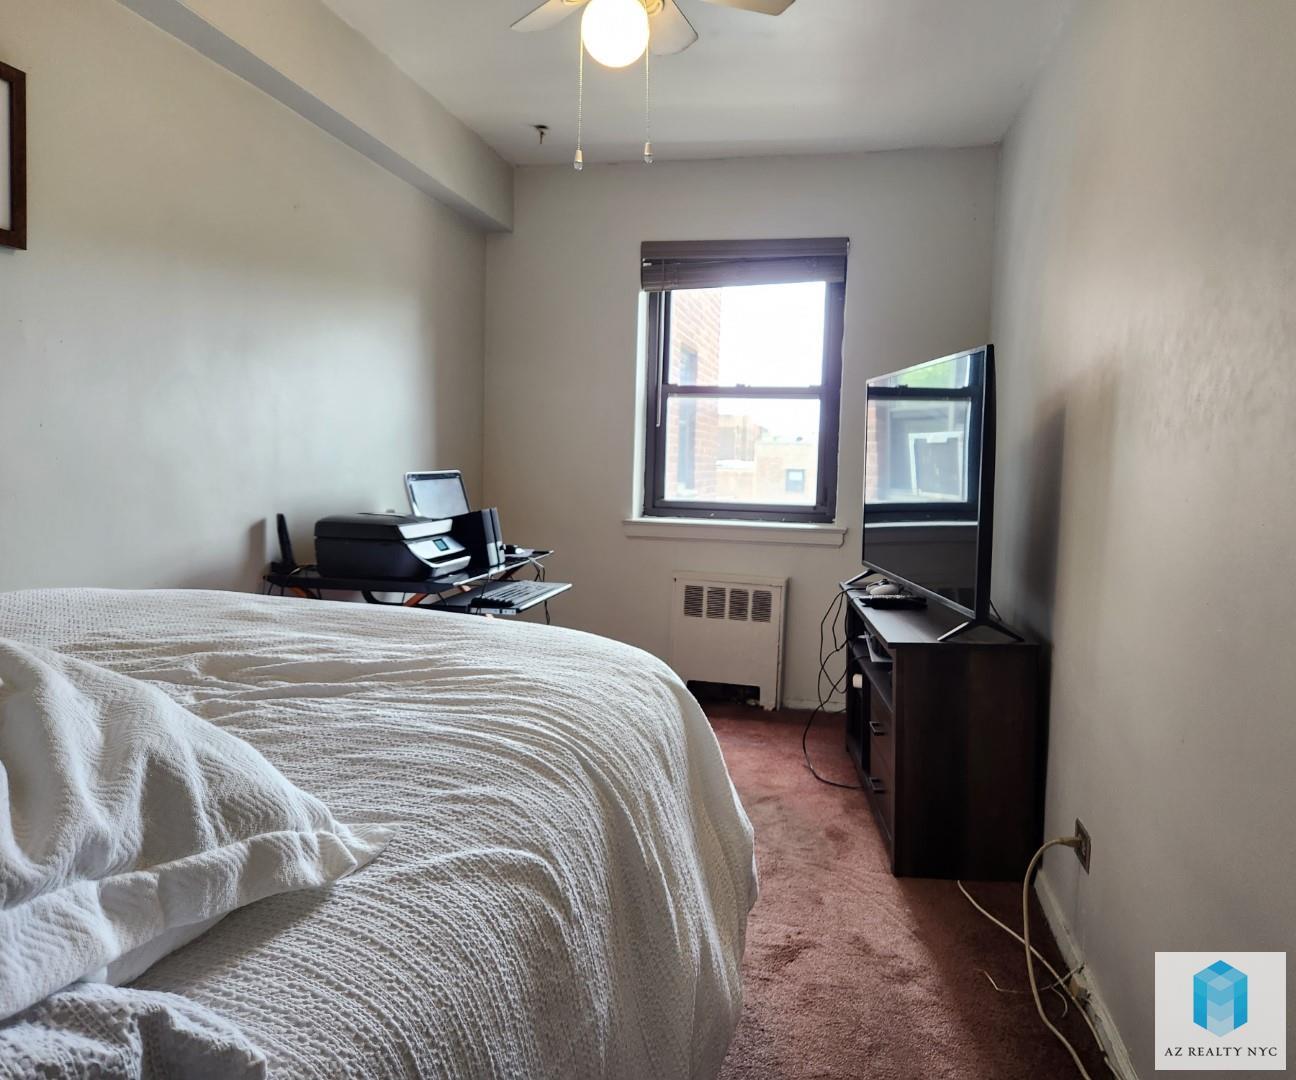 34-11 93rd Street 3-B Jackson Heights Queens NY 11372